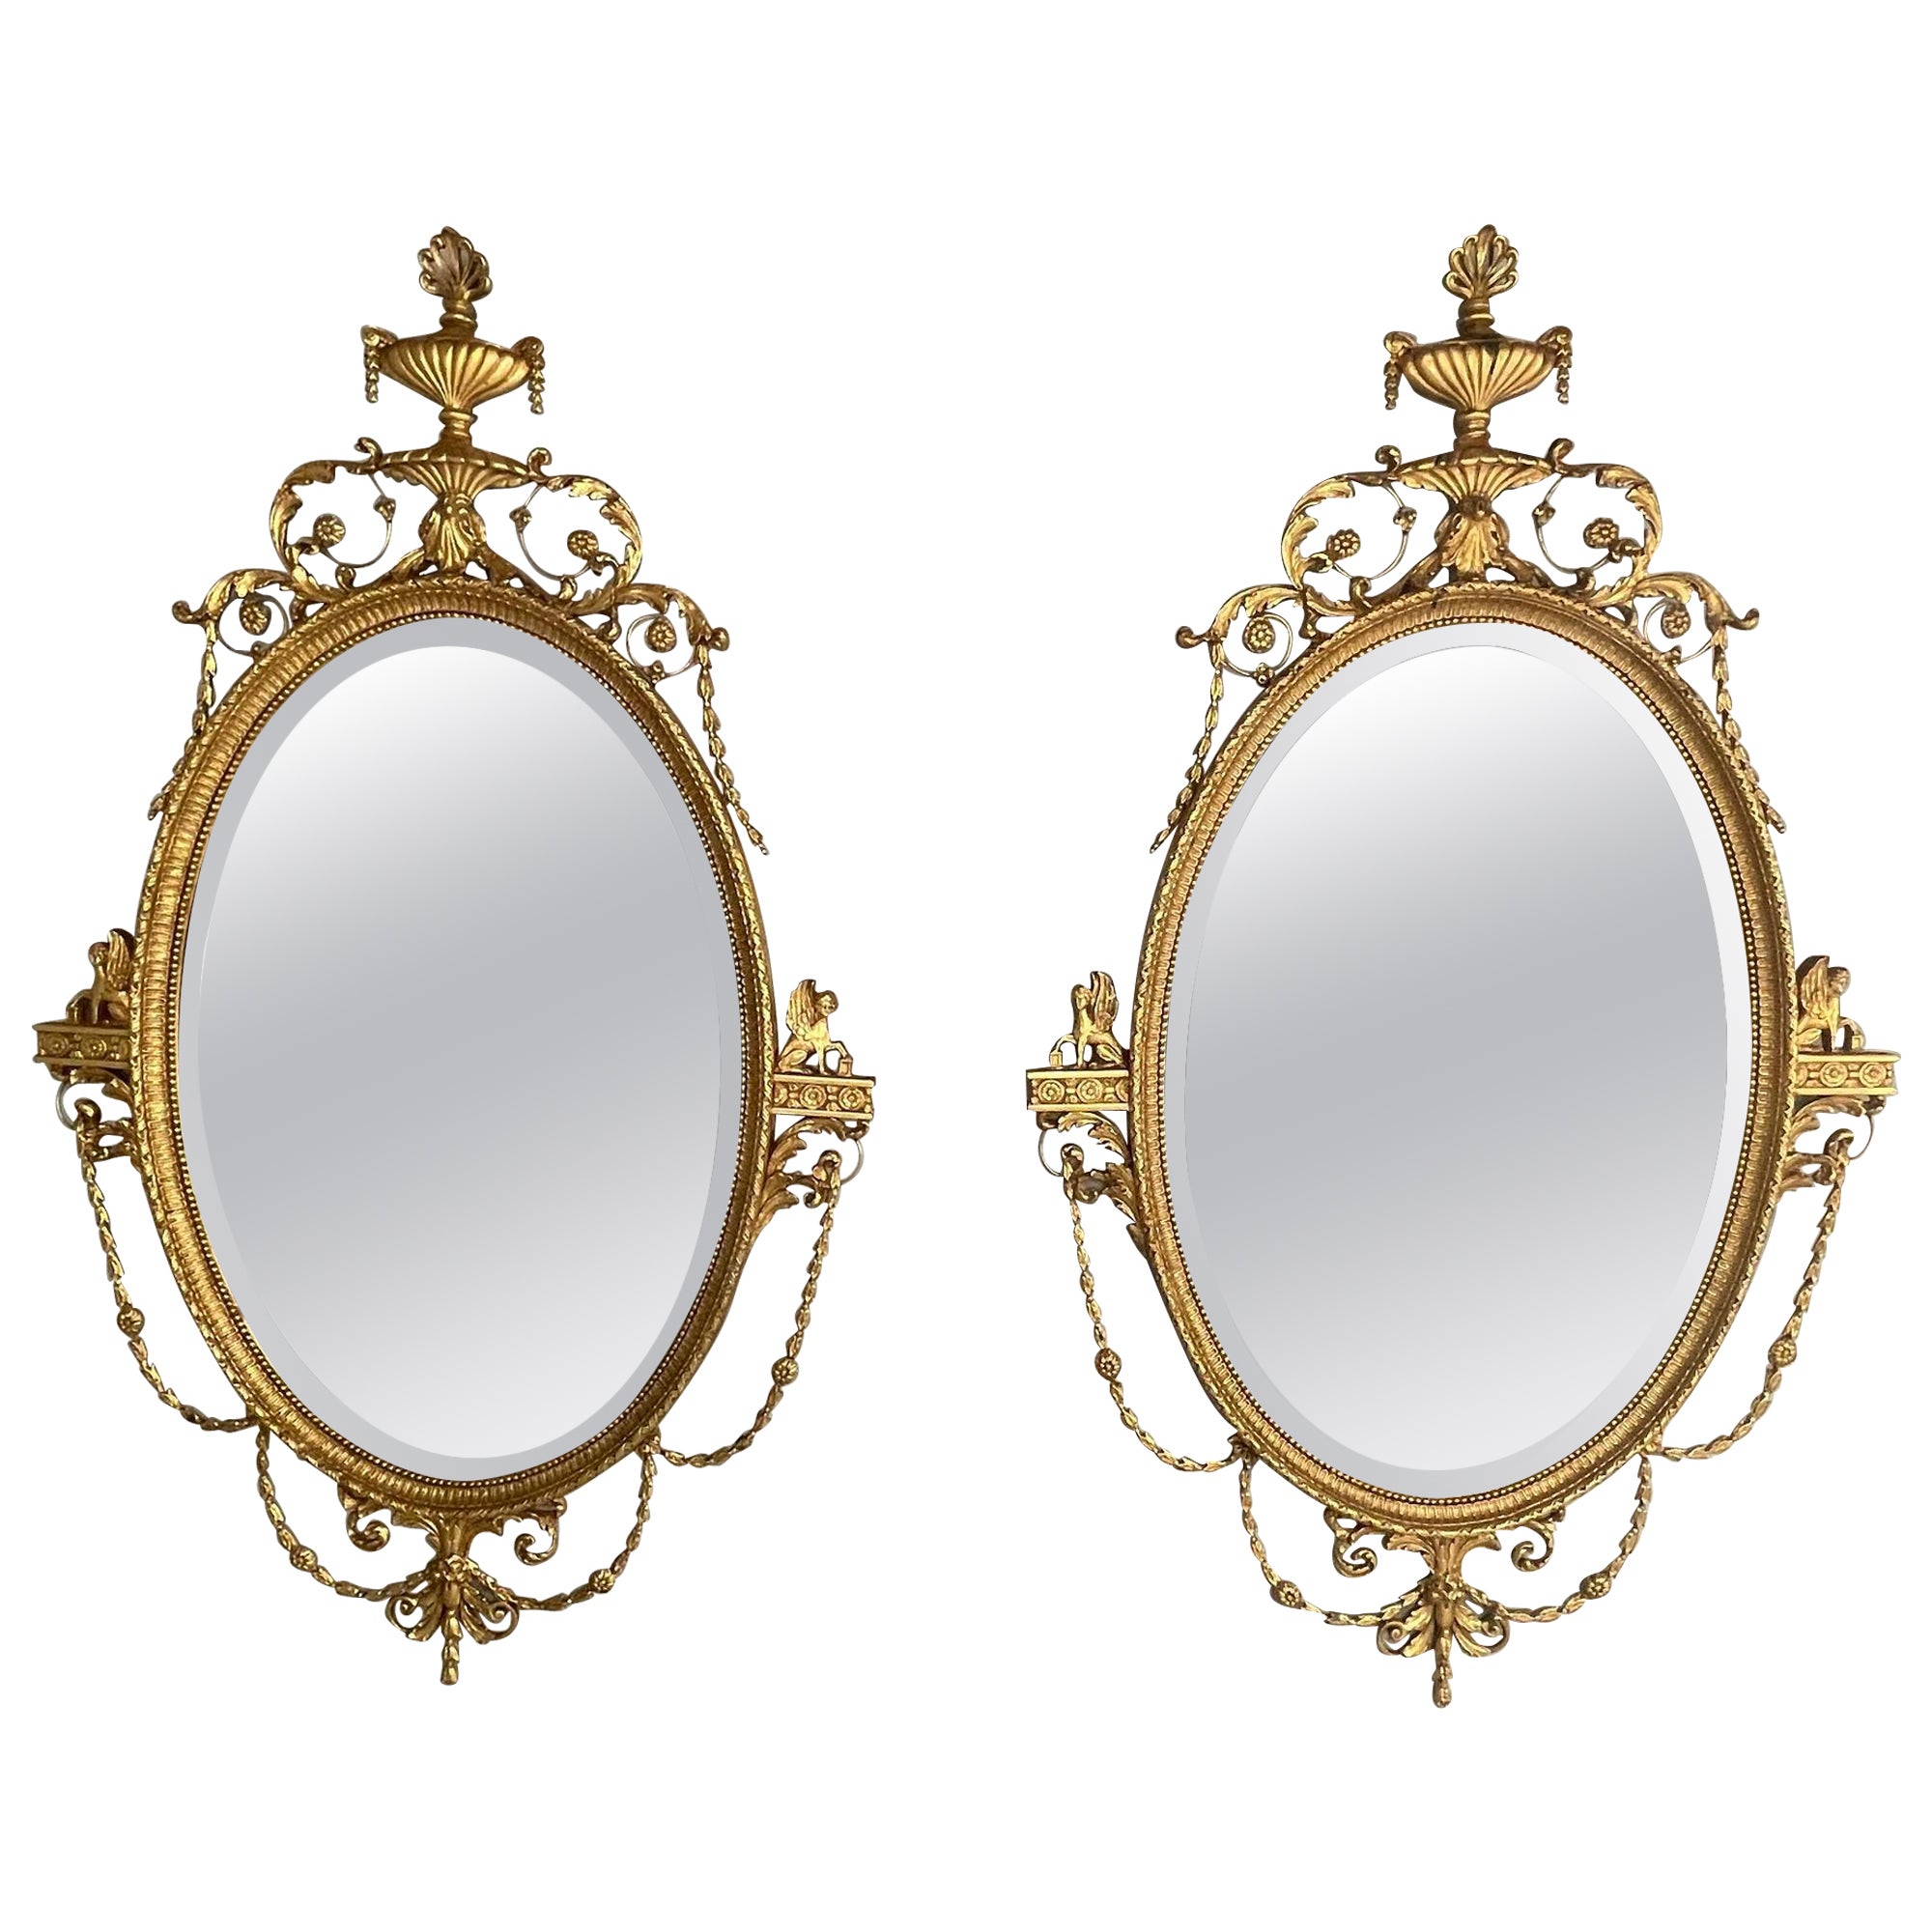 Friedman Brothers, English Regency Style, Oval Wall Mirrors, Giltwood, Gesso For Sale